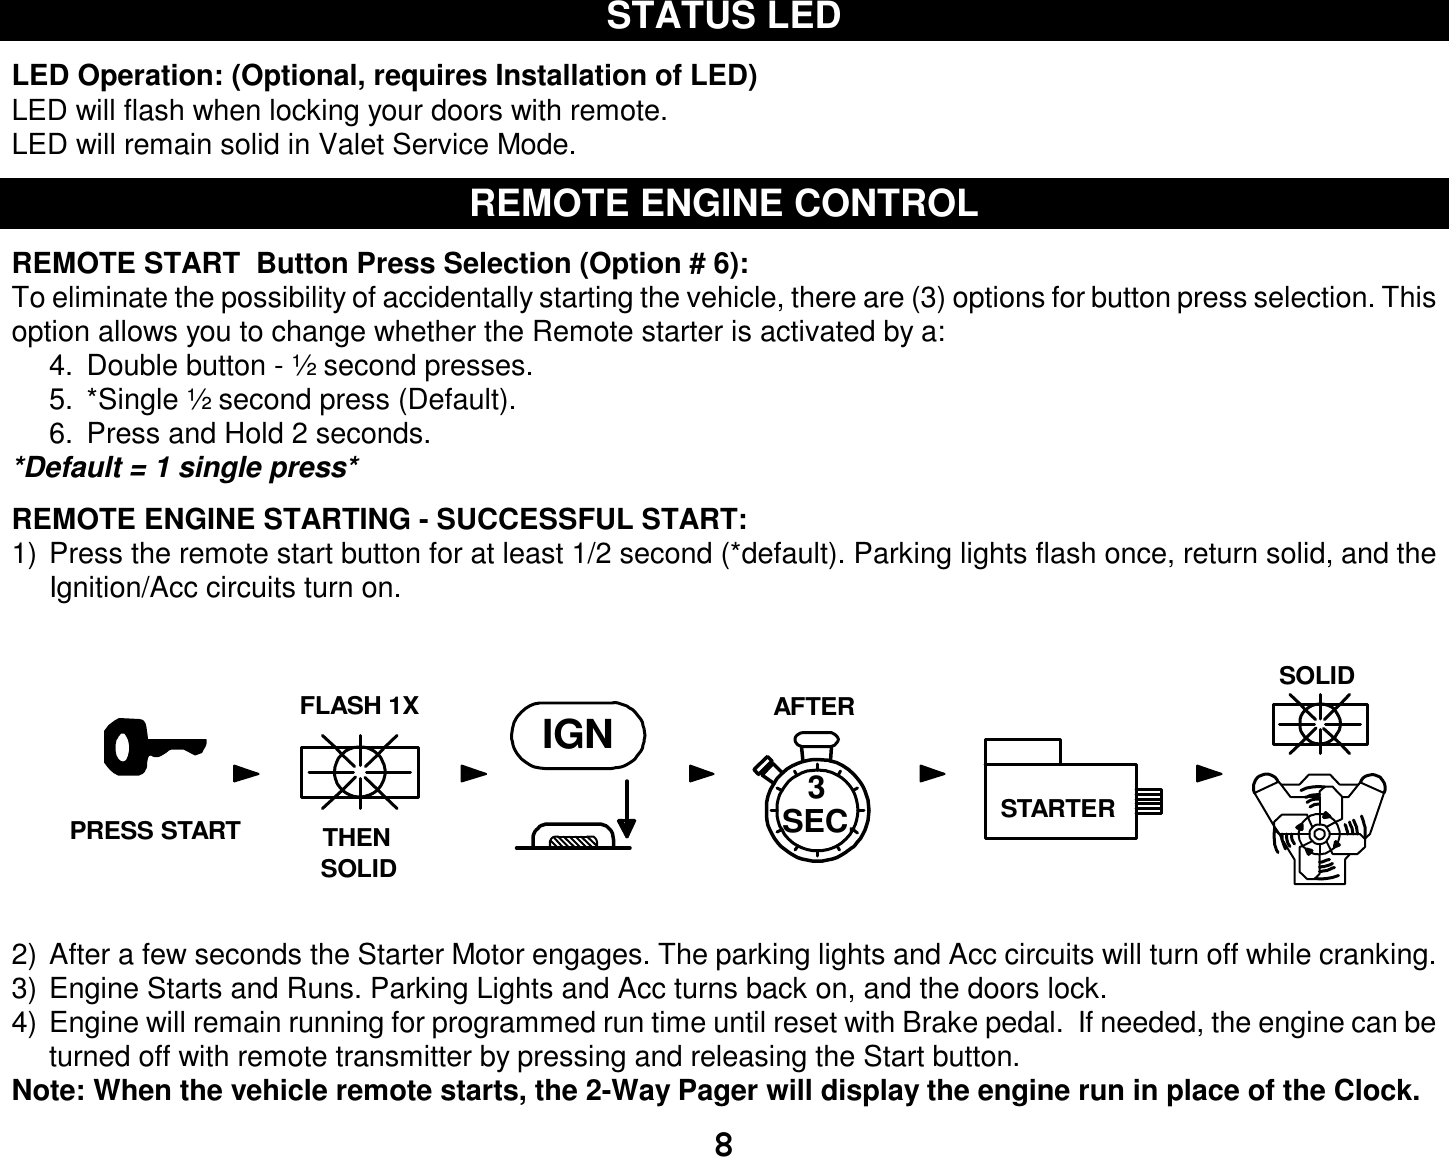  8 STATUS LED  LED Operation: (Optional, requires Installation of LED) LED will flash when locking your doors with remote.  LED will remain solid in Valet Service Mode.  REMOTE ENGINE CONTROL  REMOTE START  Button Press Selection (Option # 6): To eliminate the possibility of accidentally starting the vehicle, there are (3) options for button press selection. This option allows you to change whether the Remote starter is activated by a: 4. Double button - ½ second presses. 5. *Single ½ second press (Default). 6. Press and Hold 2 seconds. *Default = 1 single press*  REMOTE ENGINE STARTING - SUCCESSFUL START: 1) Press the remote start button for at least 1/2 second (*default). Parking lights flash once, return solid, and the Ignition/Acc circuits turn on. 2) After a few seconds the Starter Motor engages. The parking lights and Acc circuits will turn off while cranking. 3) Engine Starts and Runs. Parking Lights and Acc turns back on, and the doors lock. 4) Engine will remain running for programmed run time until reset with Brake pedal.  If needed, the engine can be turned off with remote transmitter by pressing and releasing the Start button. Note: When the vehicle remote starts, the 2-Way Pager will display the engine run in place of the Clock.  AFTERIGN3STARTERTHENFLASH 1XSOLIDSOLIDSEC.PRESS START